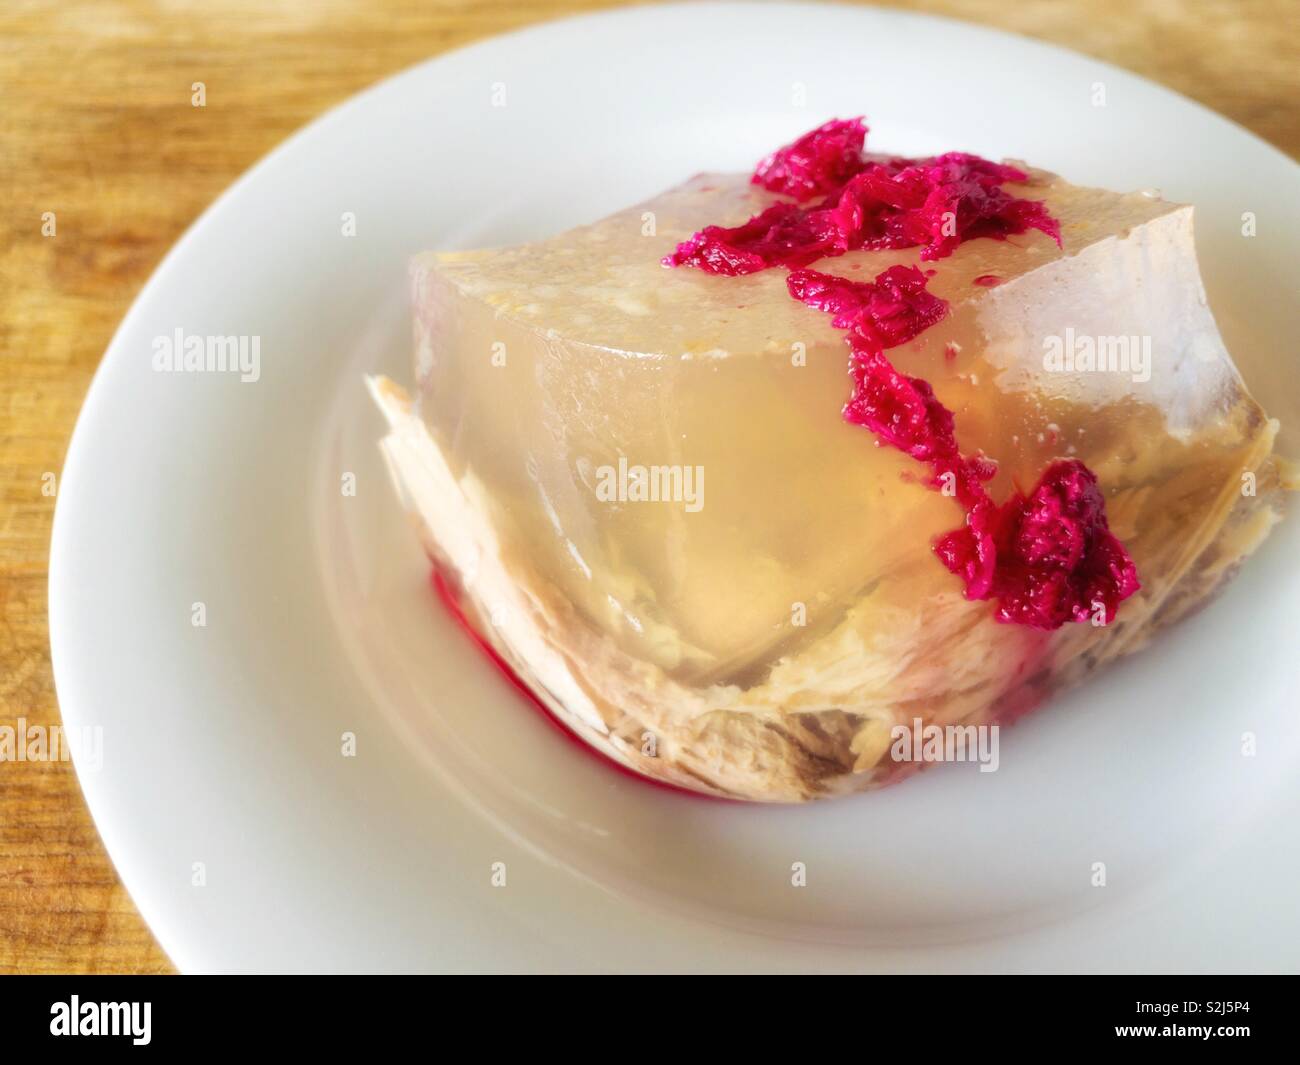 Big plate with Ukrainian aspic flavored with horse-radish pickled in beetroot juice standing on wooden surface Stock Photo